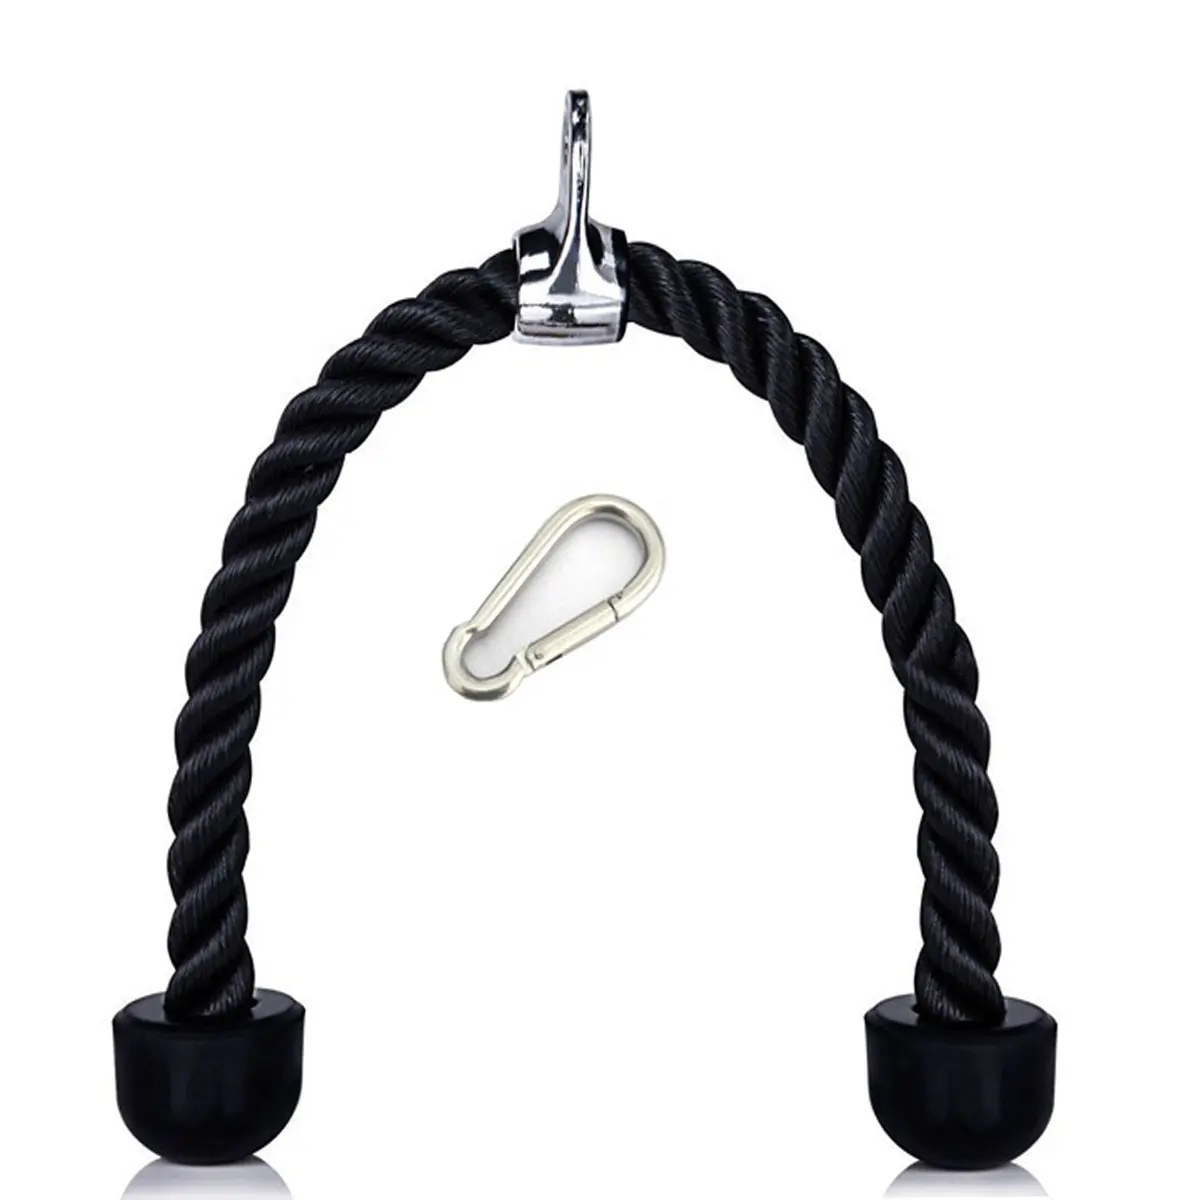 Newest style double braided nylon training tricep rope for gym fitness